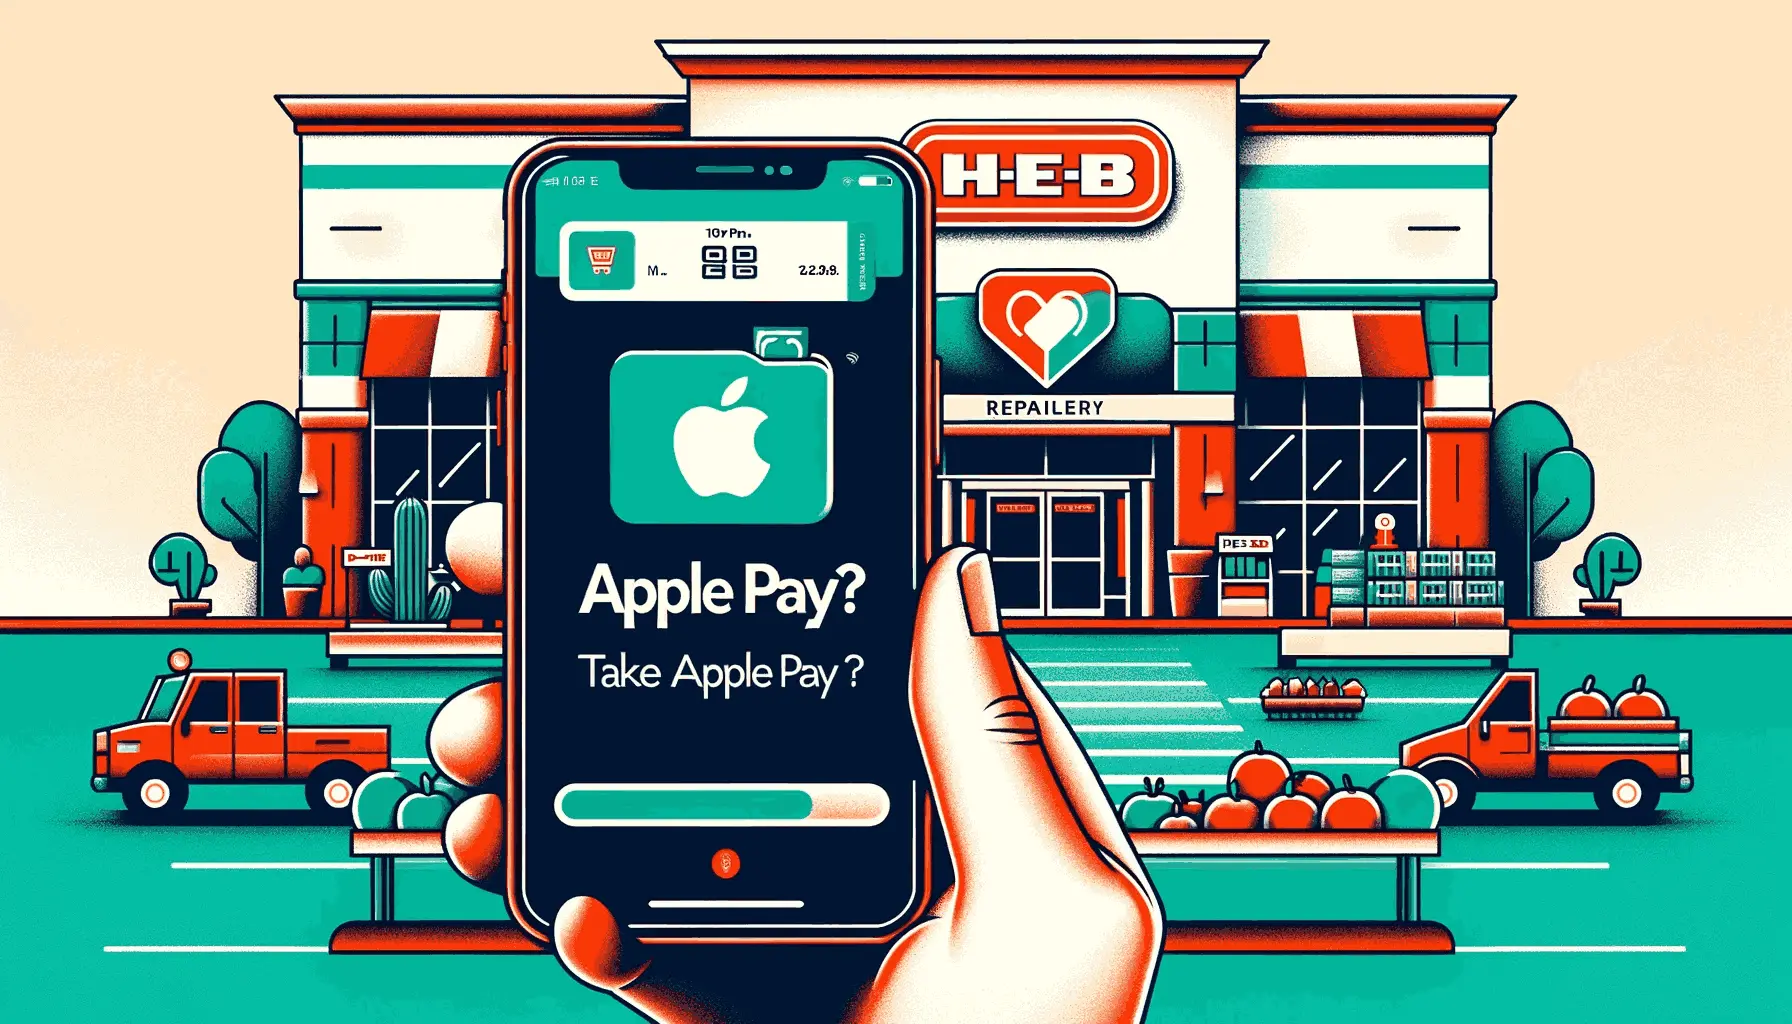 Does HEB Take Apple Pay? Suggest Wise